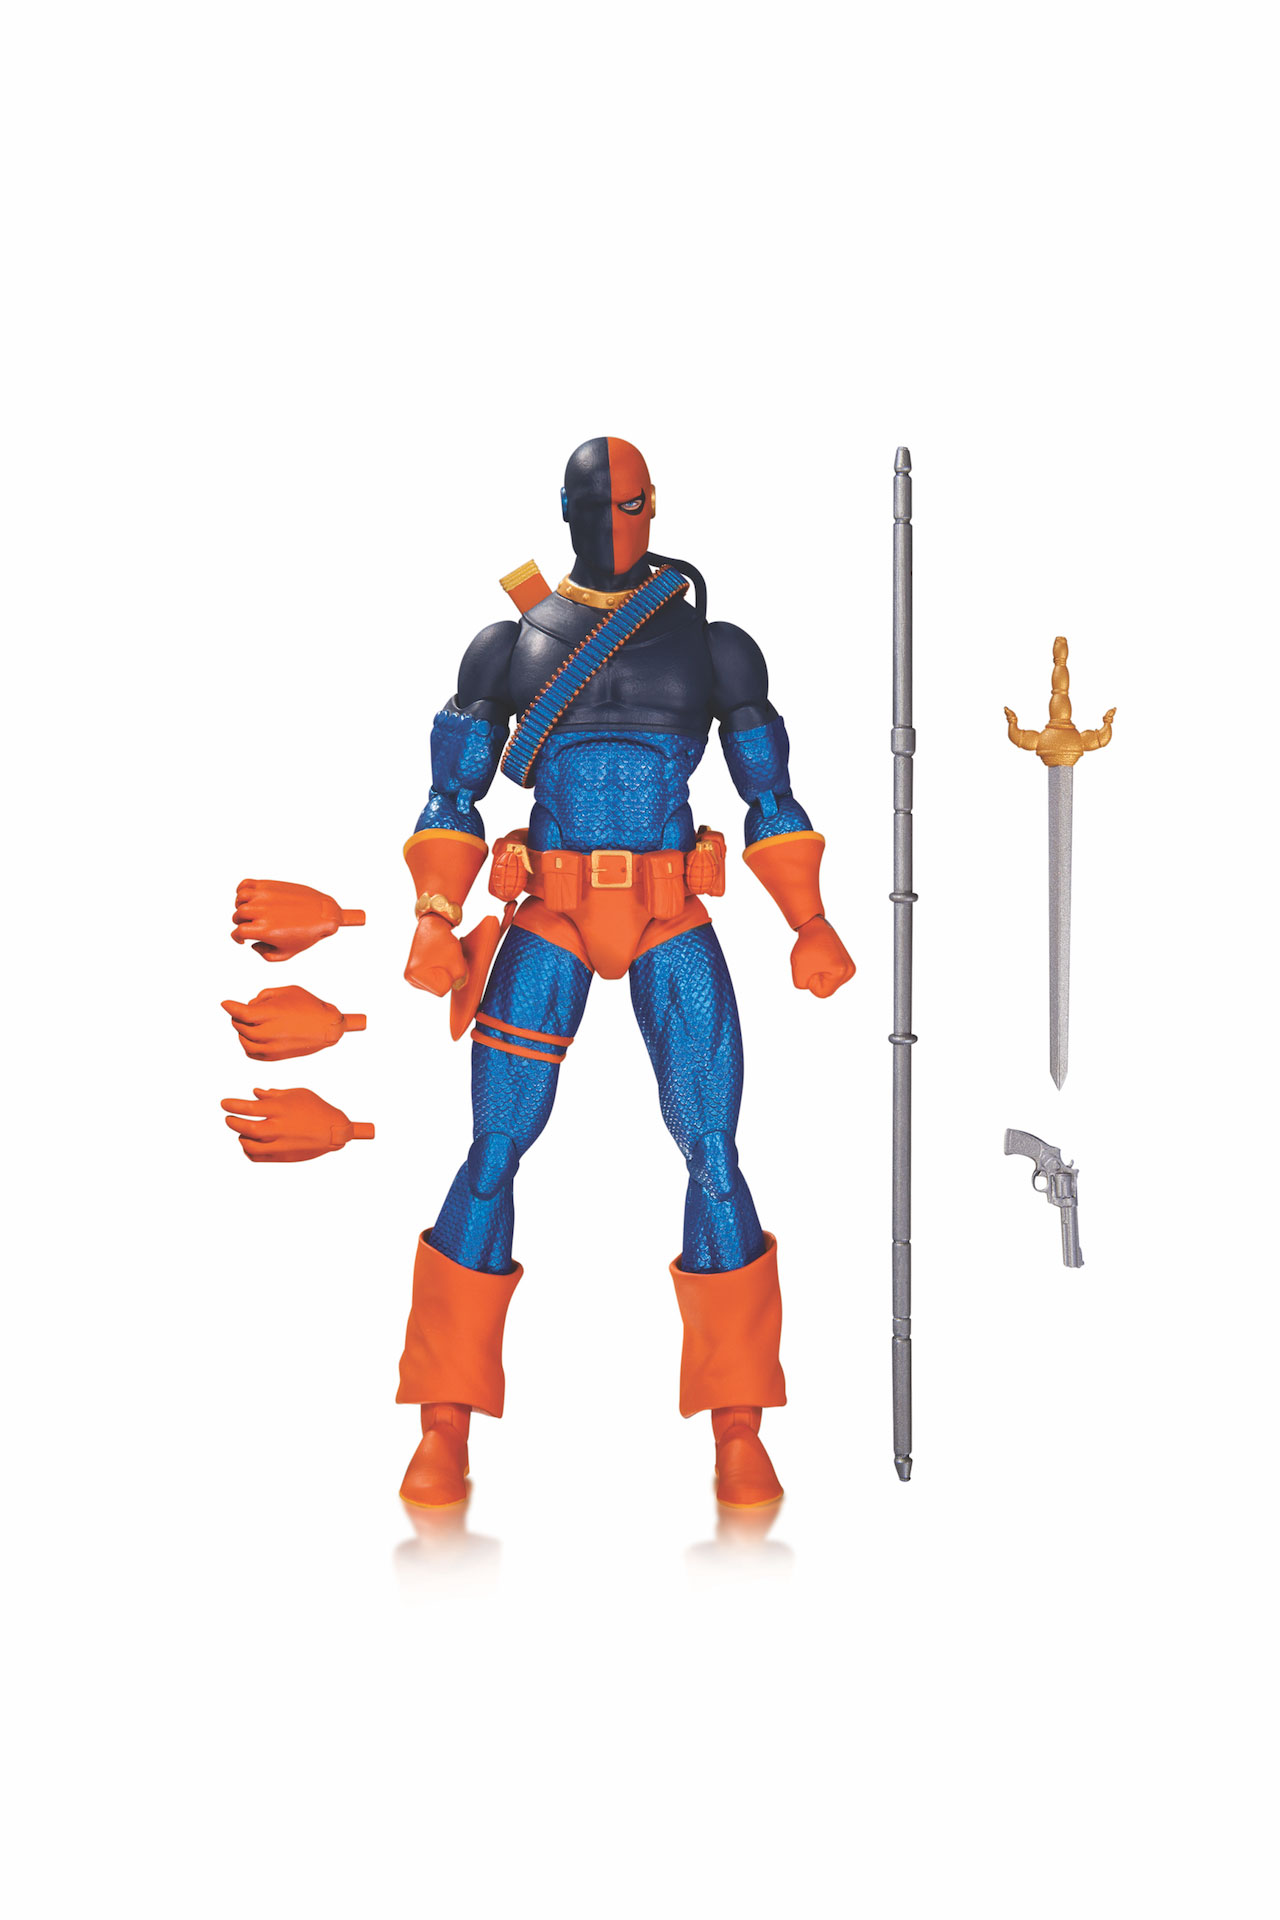 DC ICONS CYBORG DELUXE, DEATHSTROKE, SWAMP THING AND WONDER WOMAN ACTION FIGURES